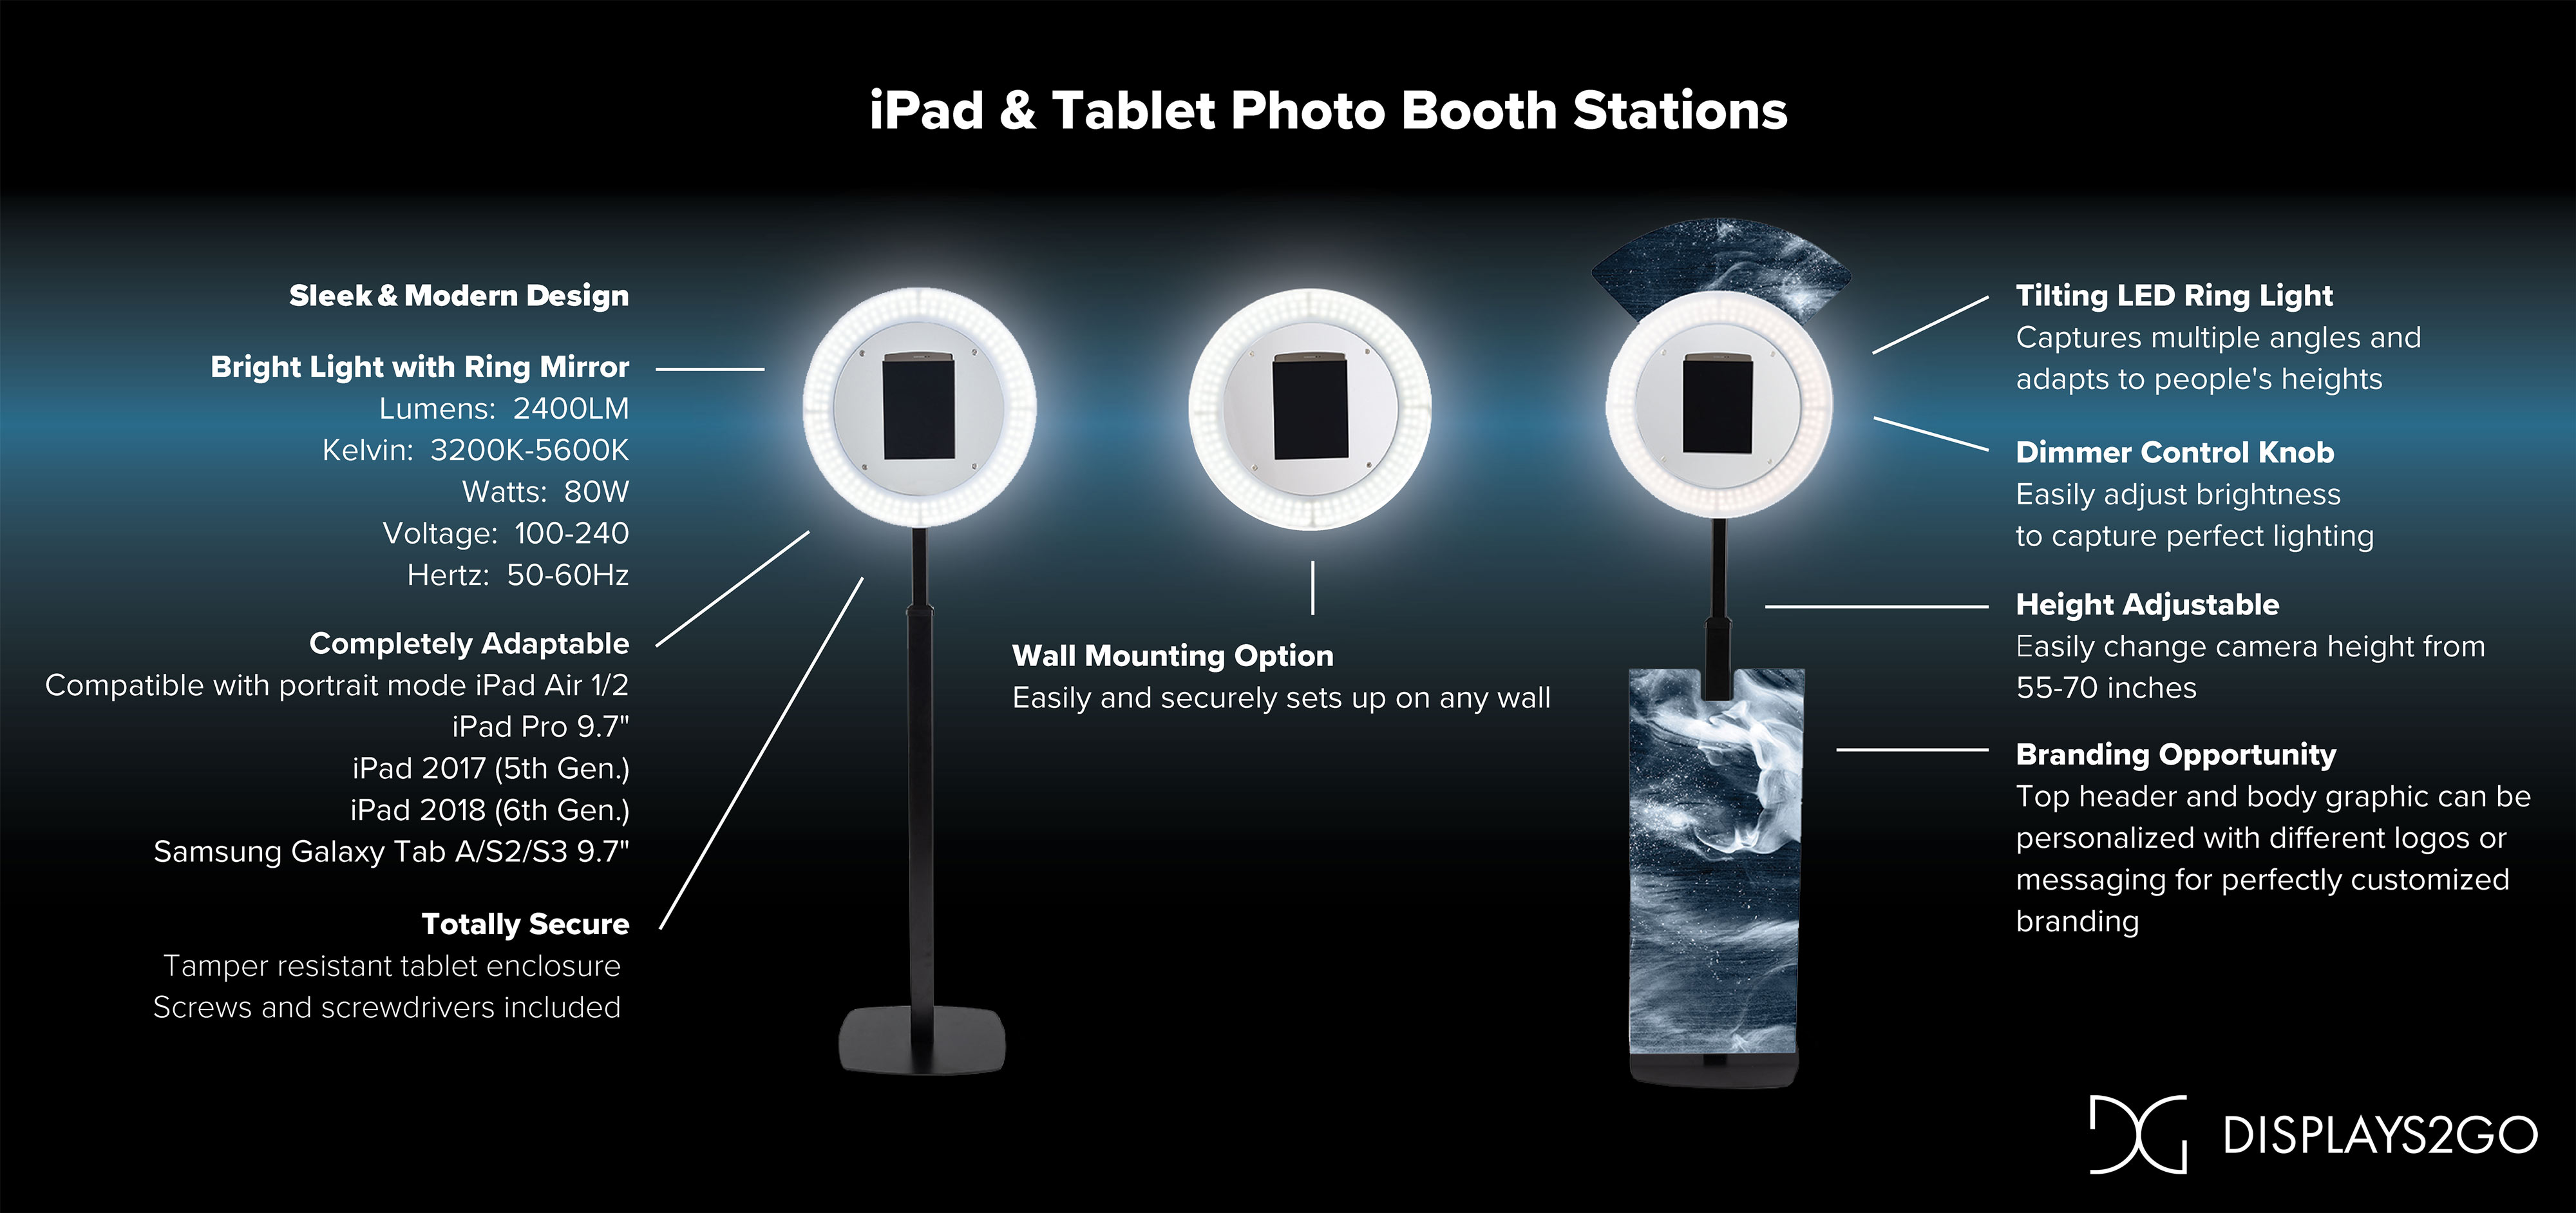 Floor standing, wall mounting and customizable iPad & Tablet photo booth stations for commercial events for sale